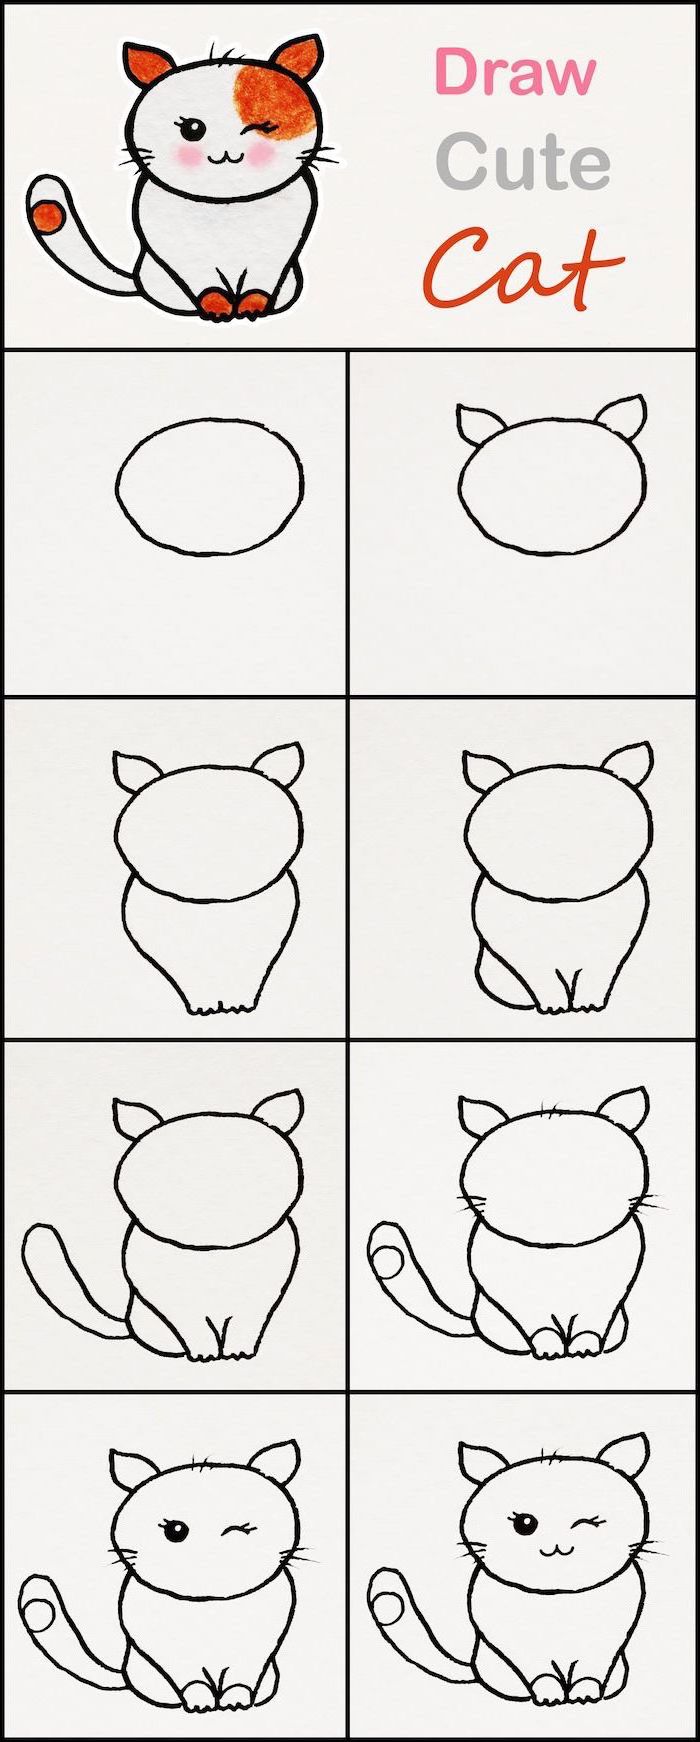 how to draw a cat, cool things to draw, step by step diy tutorial, sketch on white background